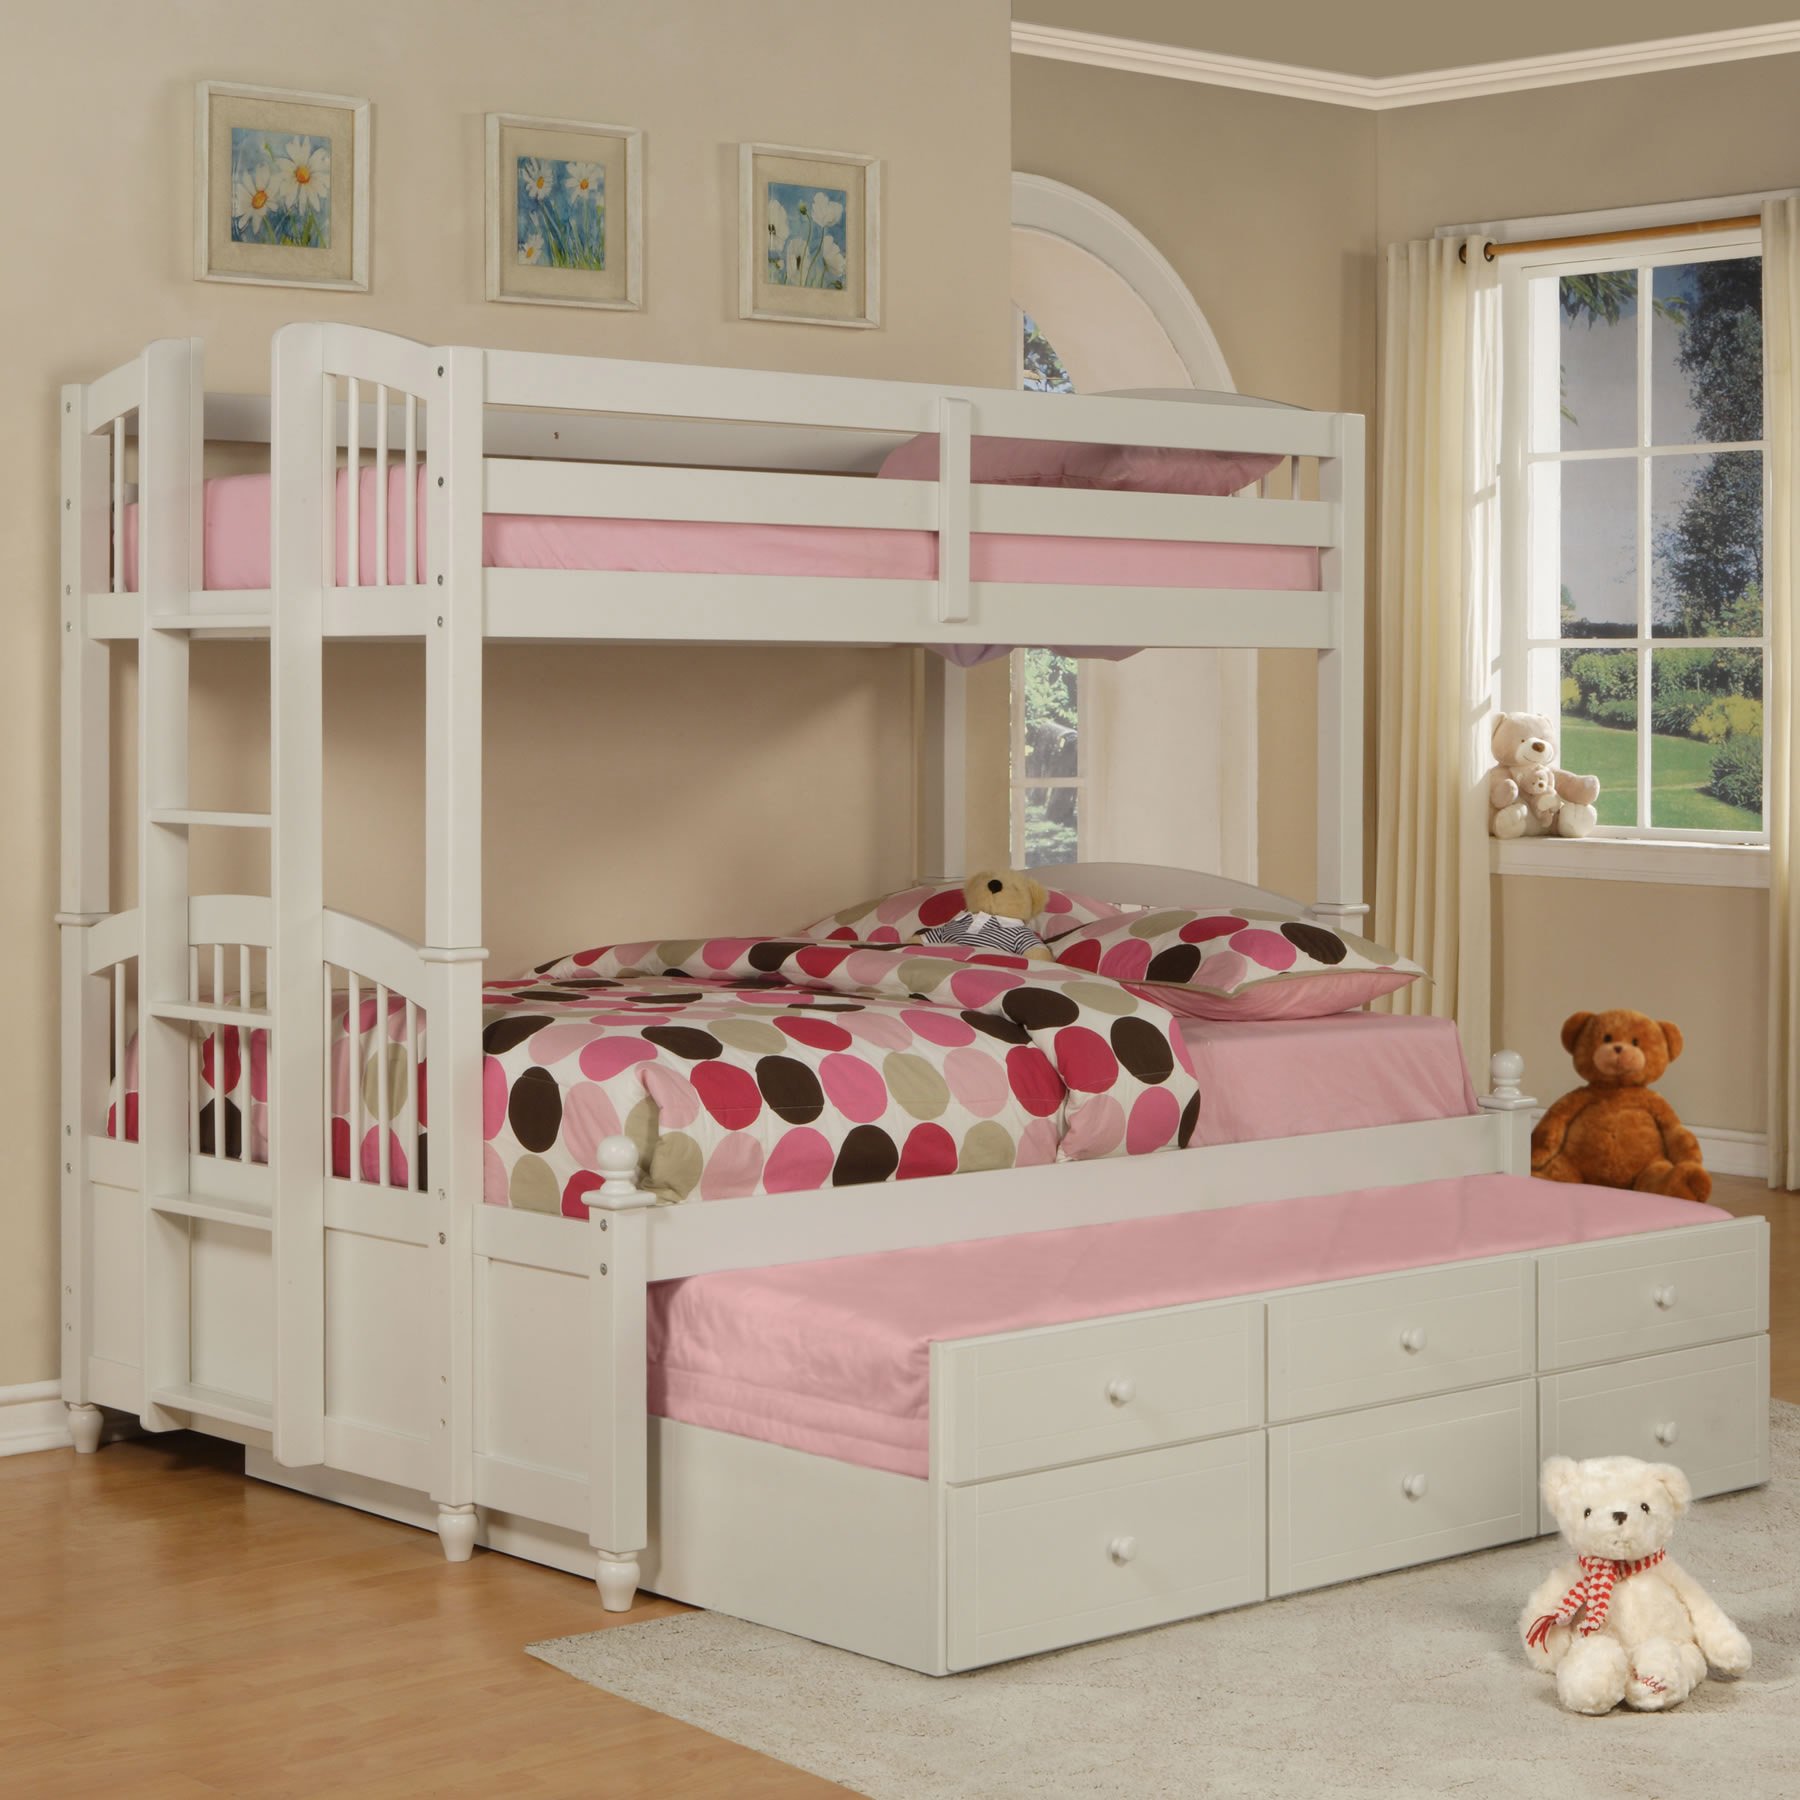 3 Bed Bunk Beds For Kids: Best Shopping Tips